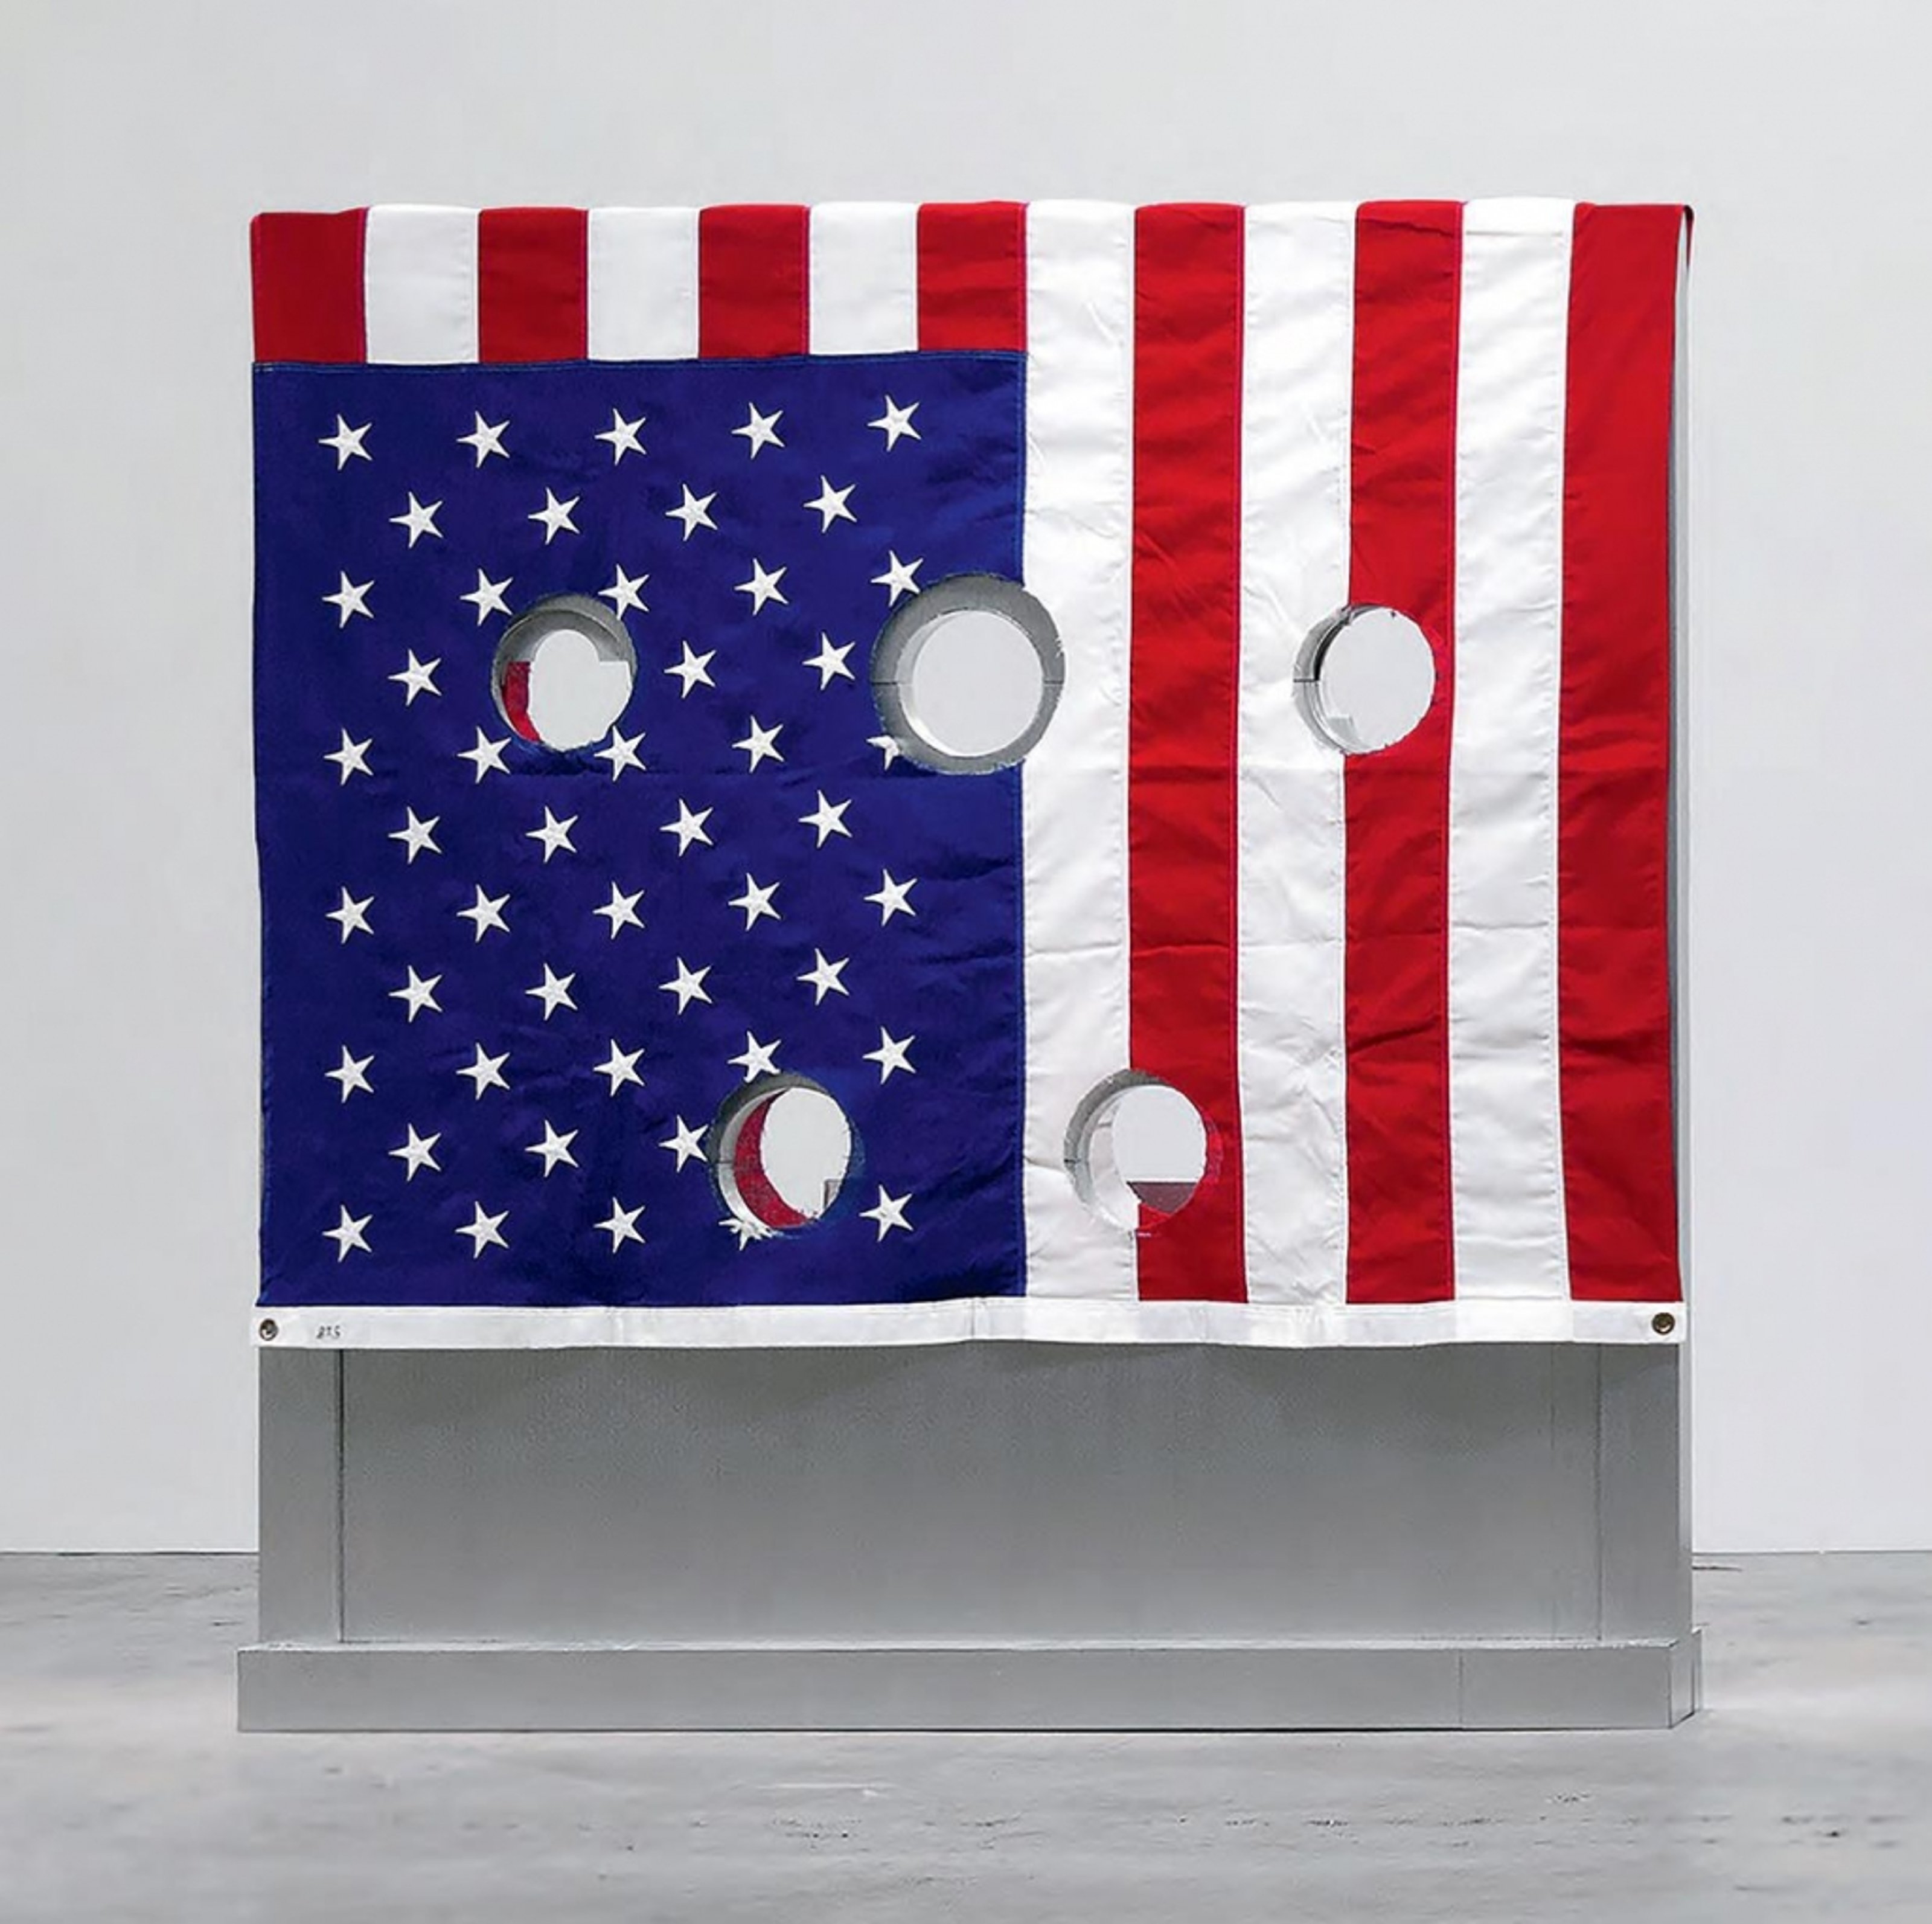 Artwork made with American flag